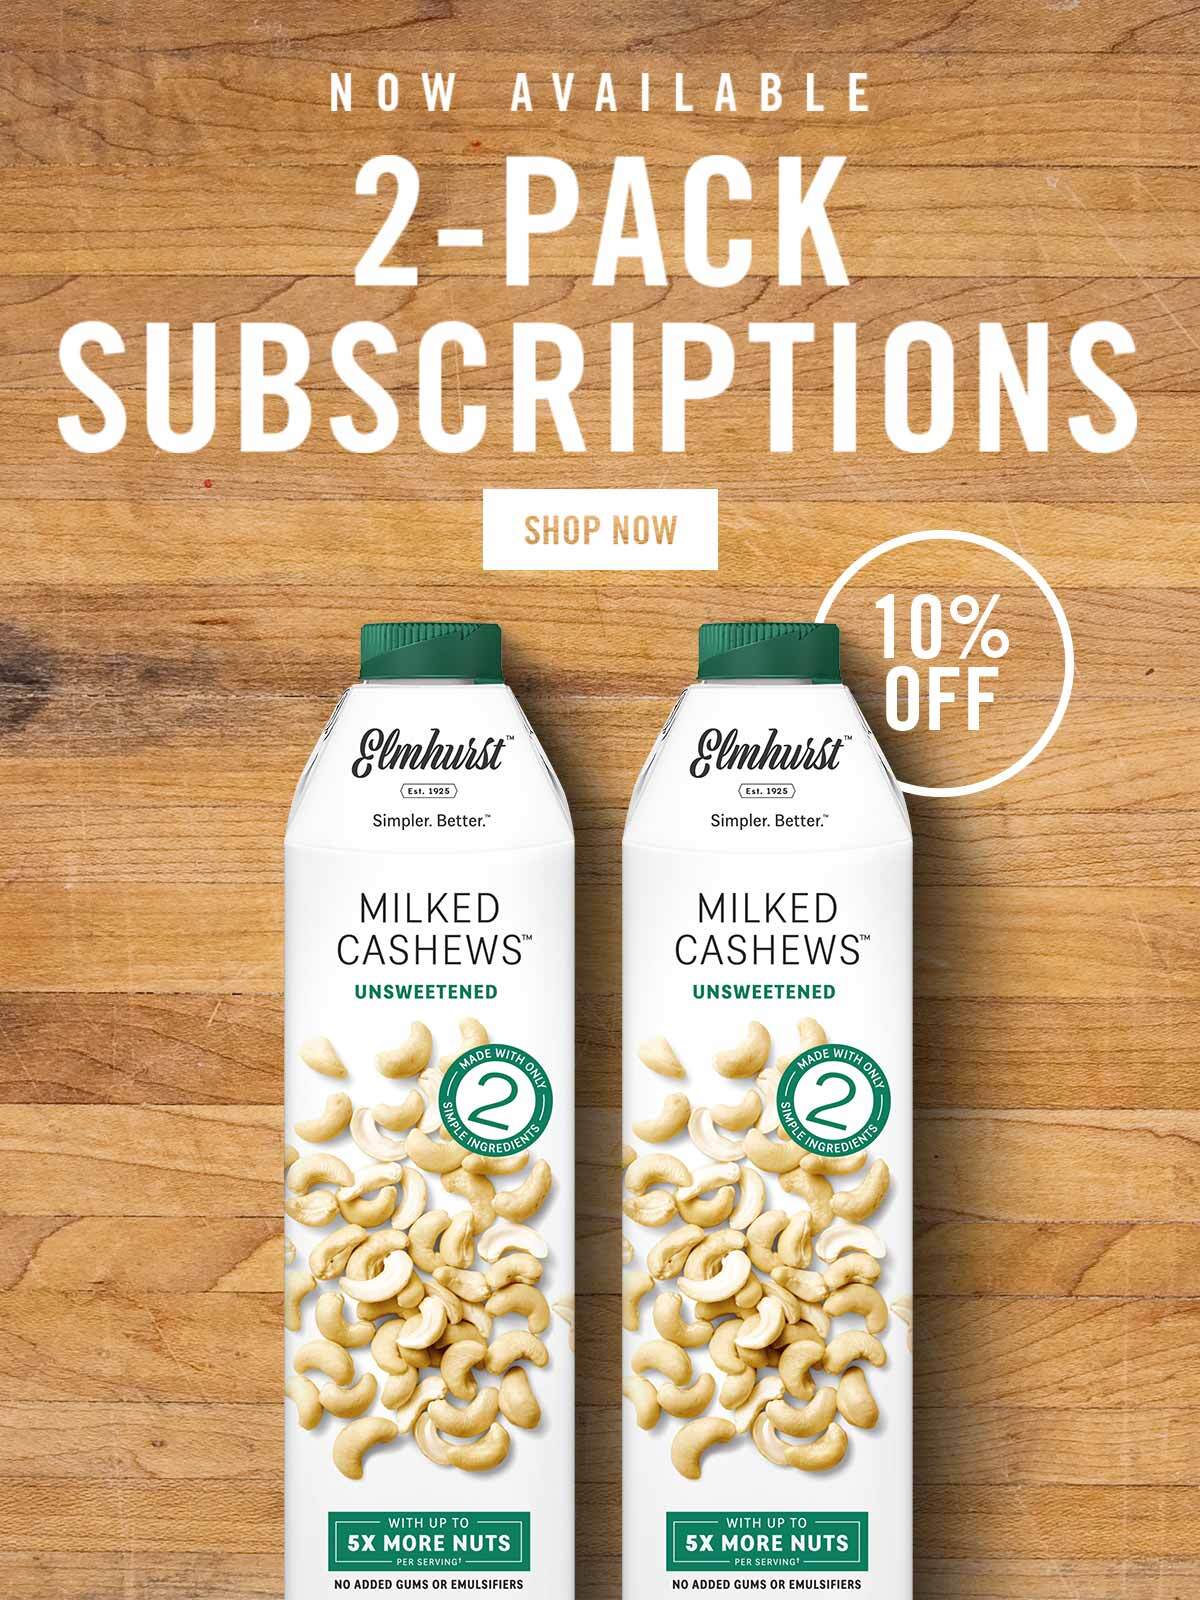 2pack subscriptions